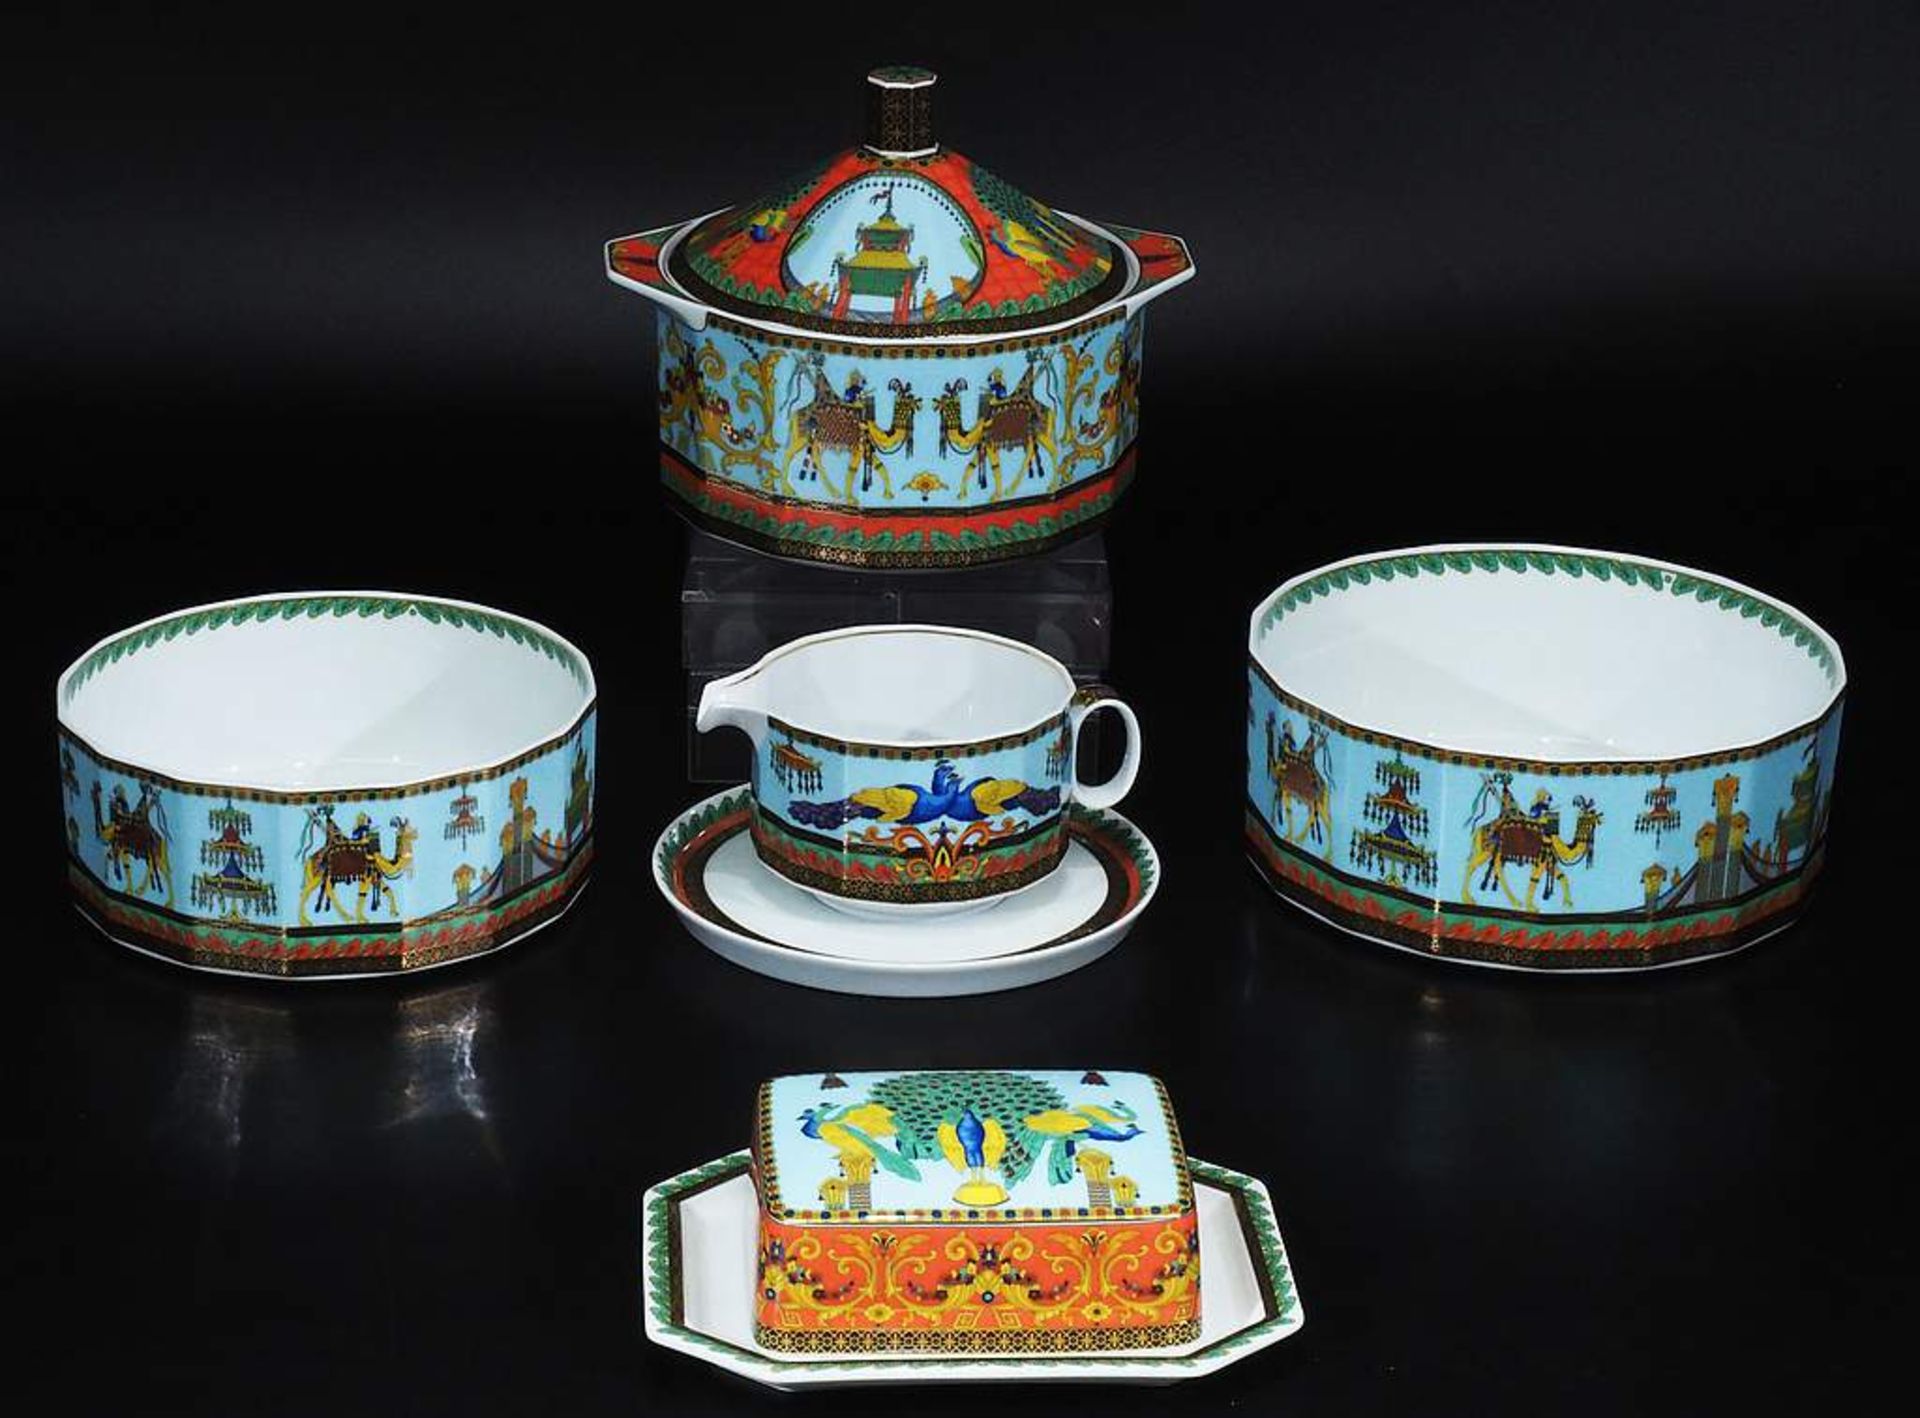 Umfangreiches Kaffee-, Mocca- und Speiseservice. ROSENTHAL, Versace, Dekor "le Yoyage de Marco Polo - Image 5 of 8